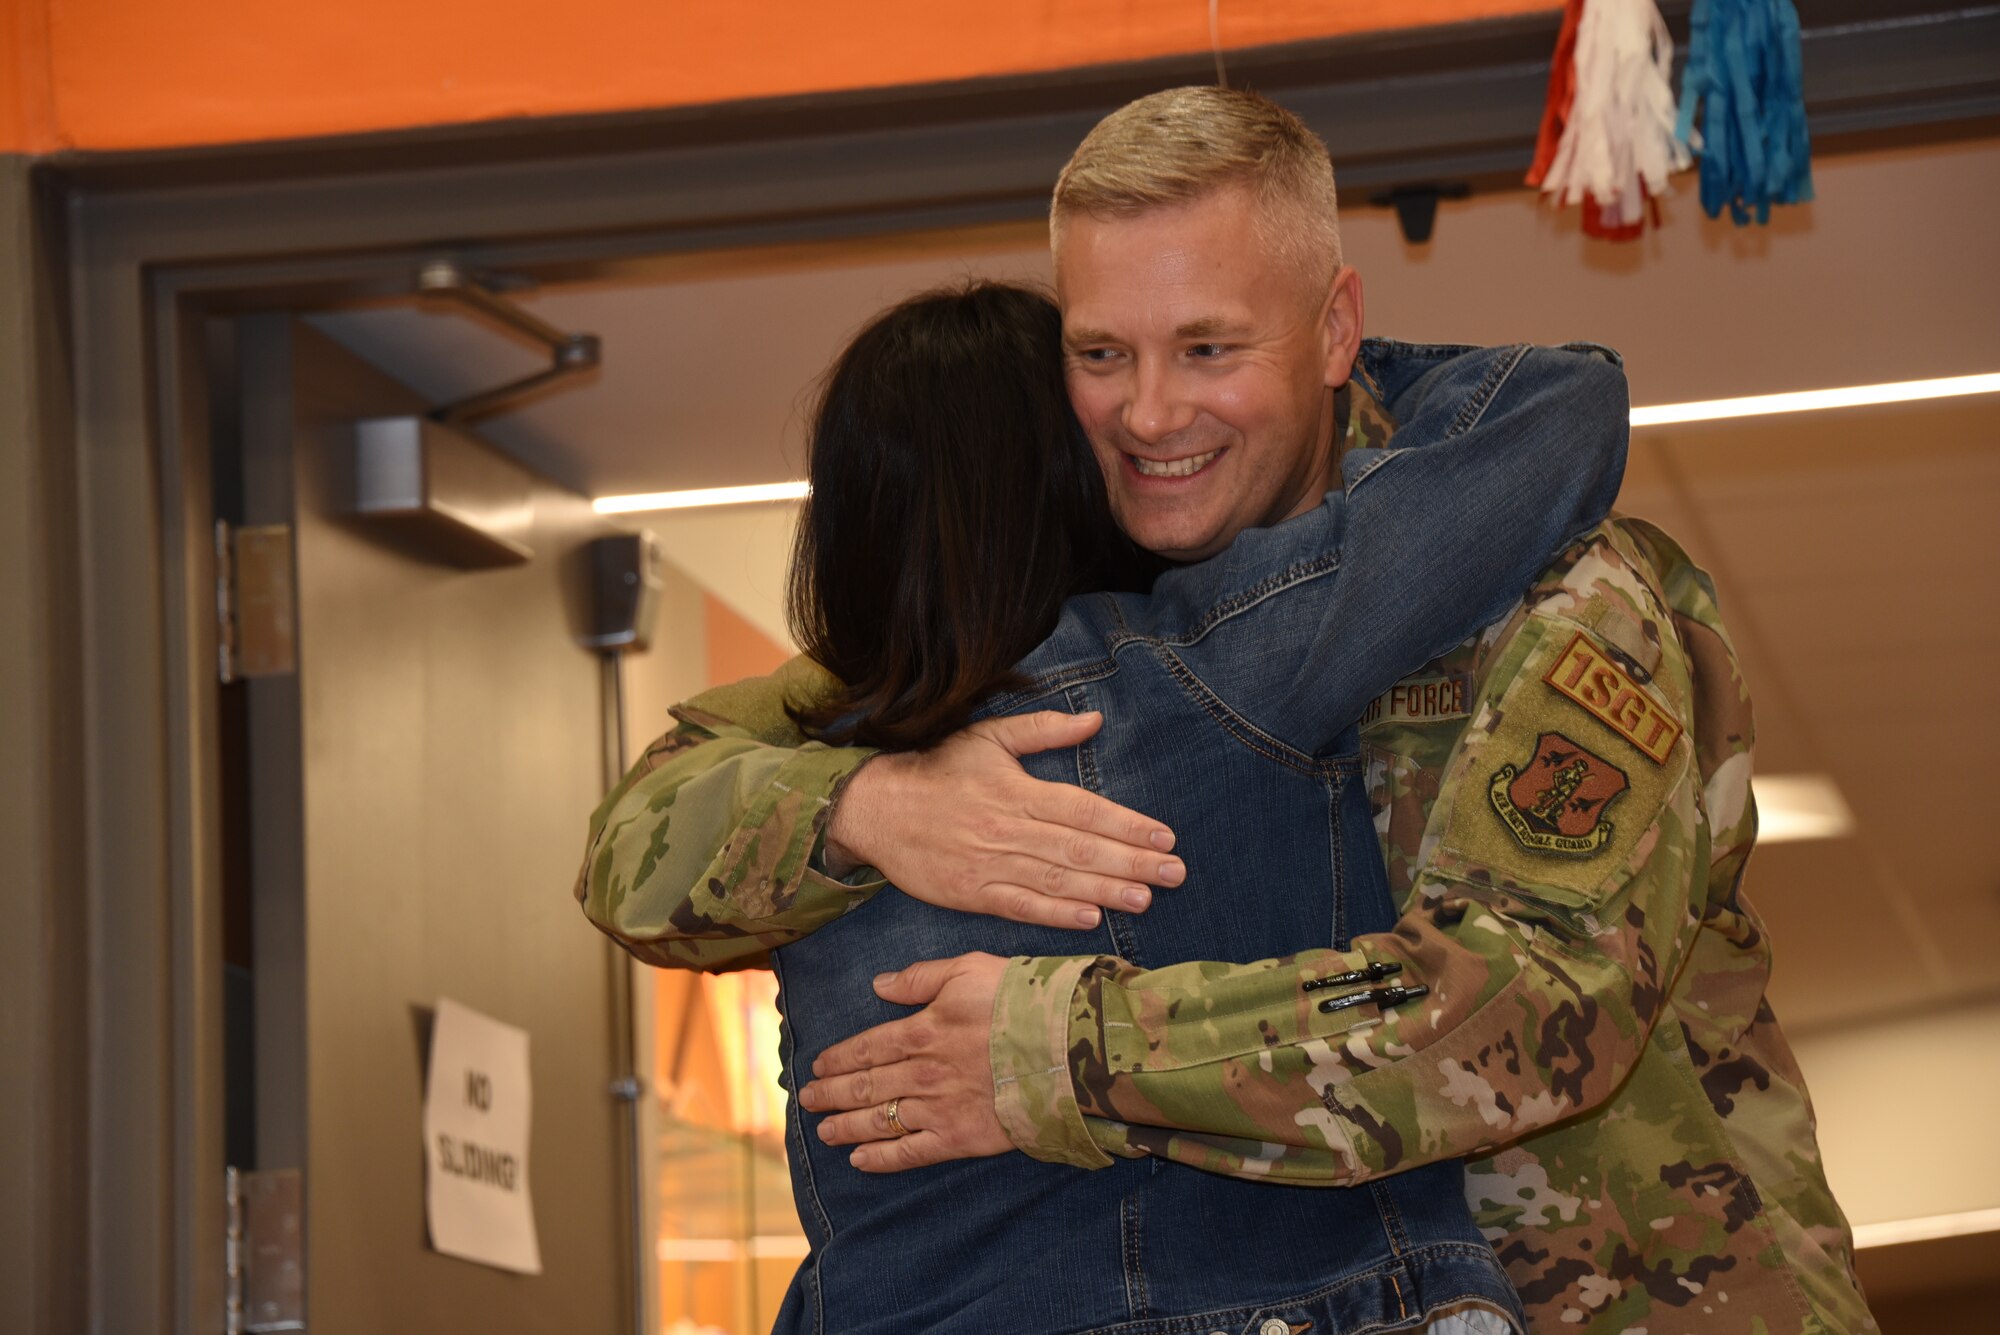 Iowa Air National Guard 1st Sgt. Drew Wagner hugs a teacher at a welcome home event in his honor at the Fort Calhoun Elementary School in Fort Calhoun, Neb., April 21, 2022. Wagner, the school principal, had just returned from a six-month deployment to Southwest Asia.